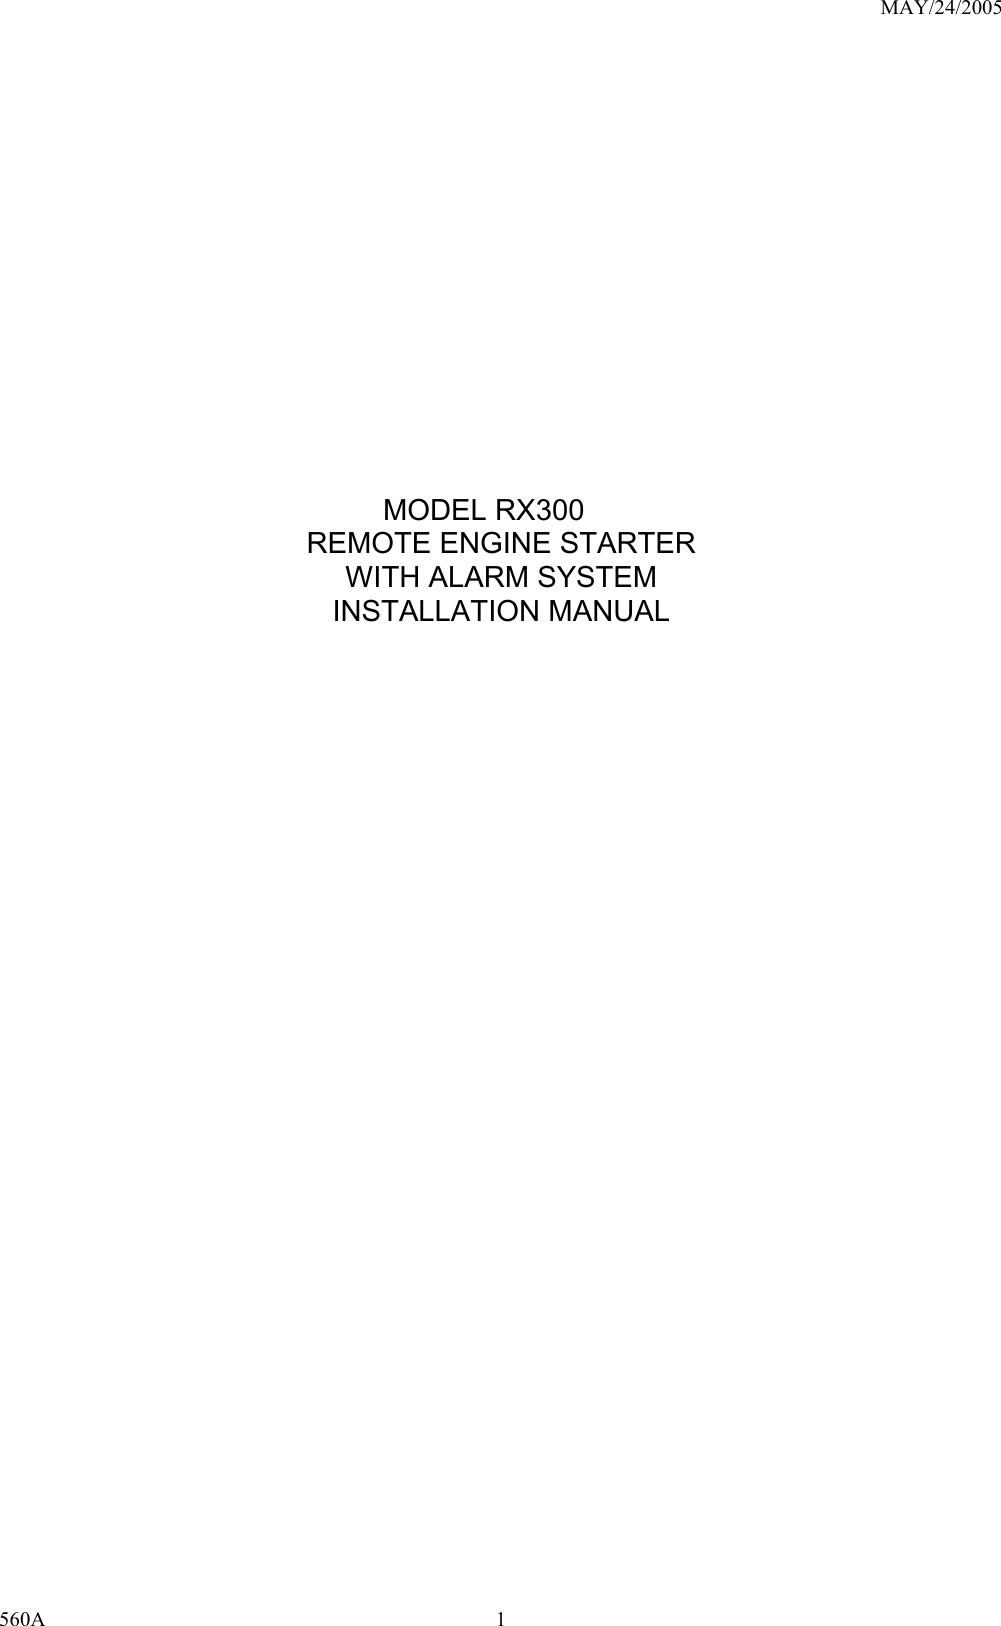 MAY/24/2005 560A 1                      MODEL RX300 REMOTE ENGINE STARTER WITH ALARM SYSTEM INSTALLATION MANUAL                             